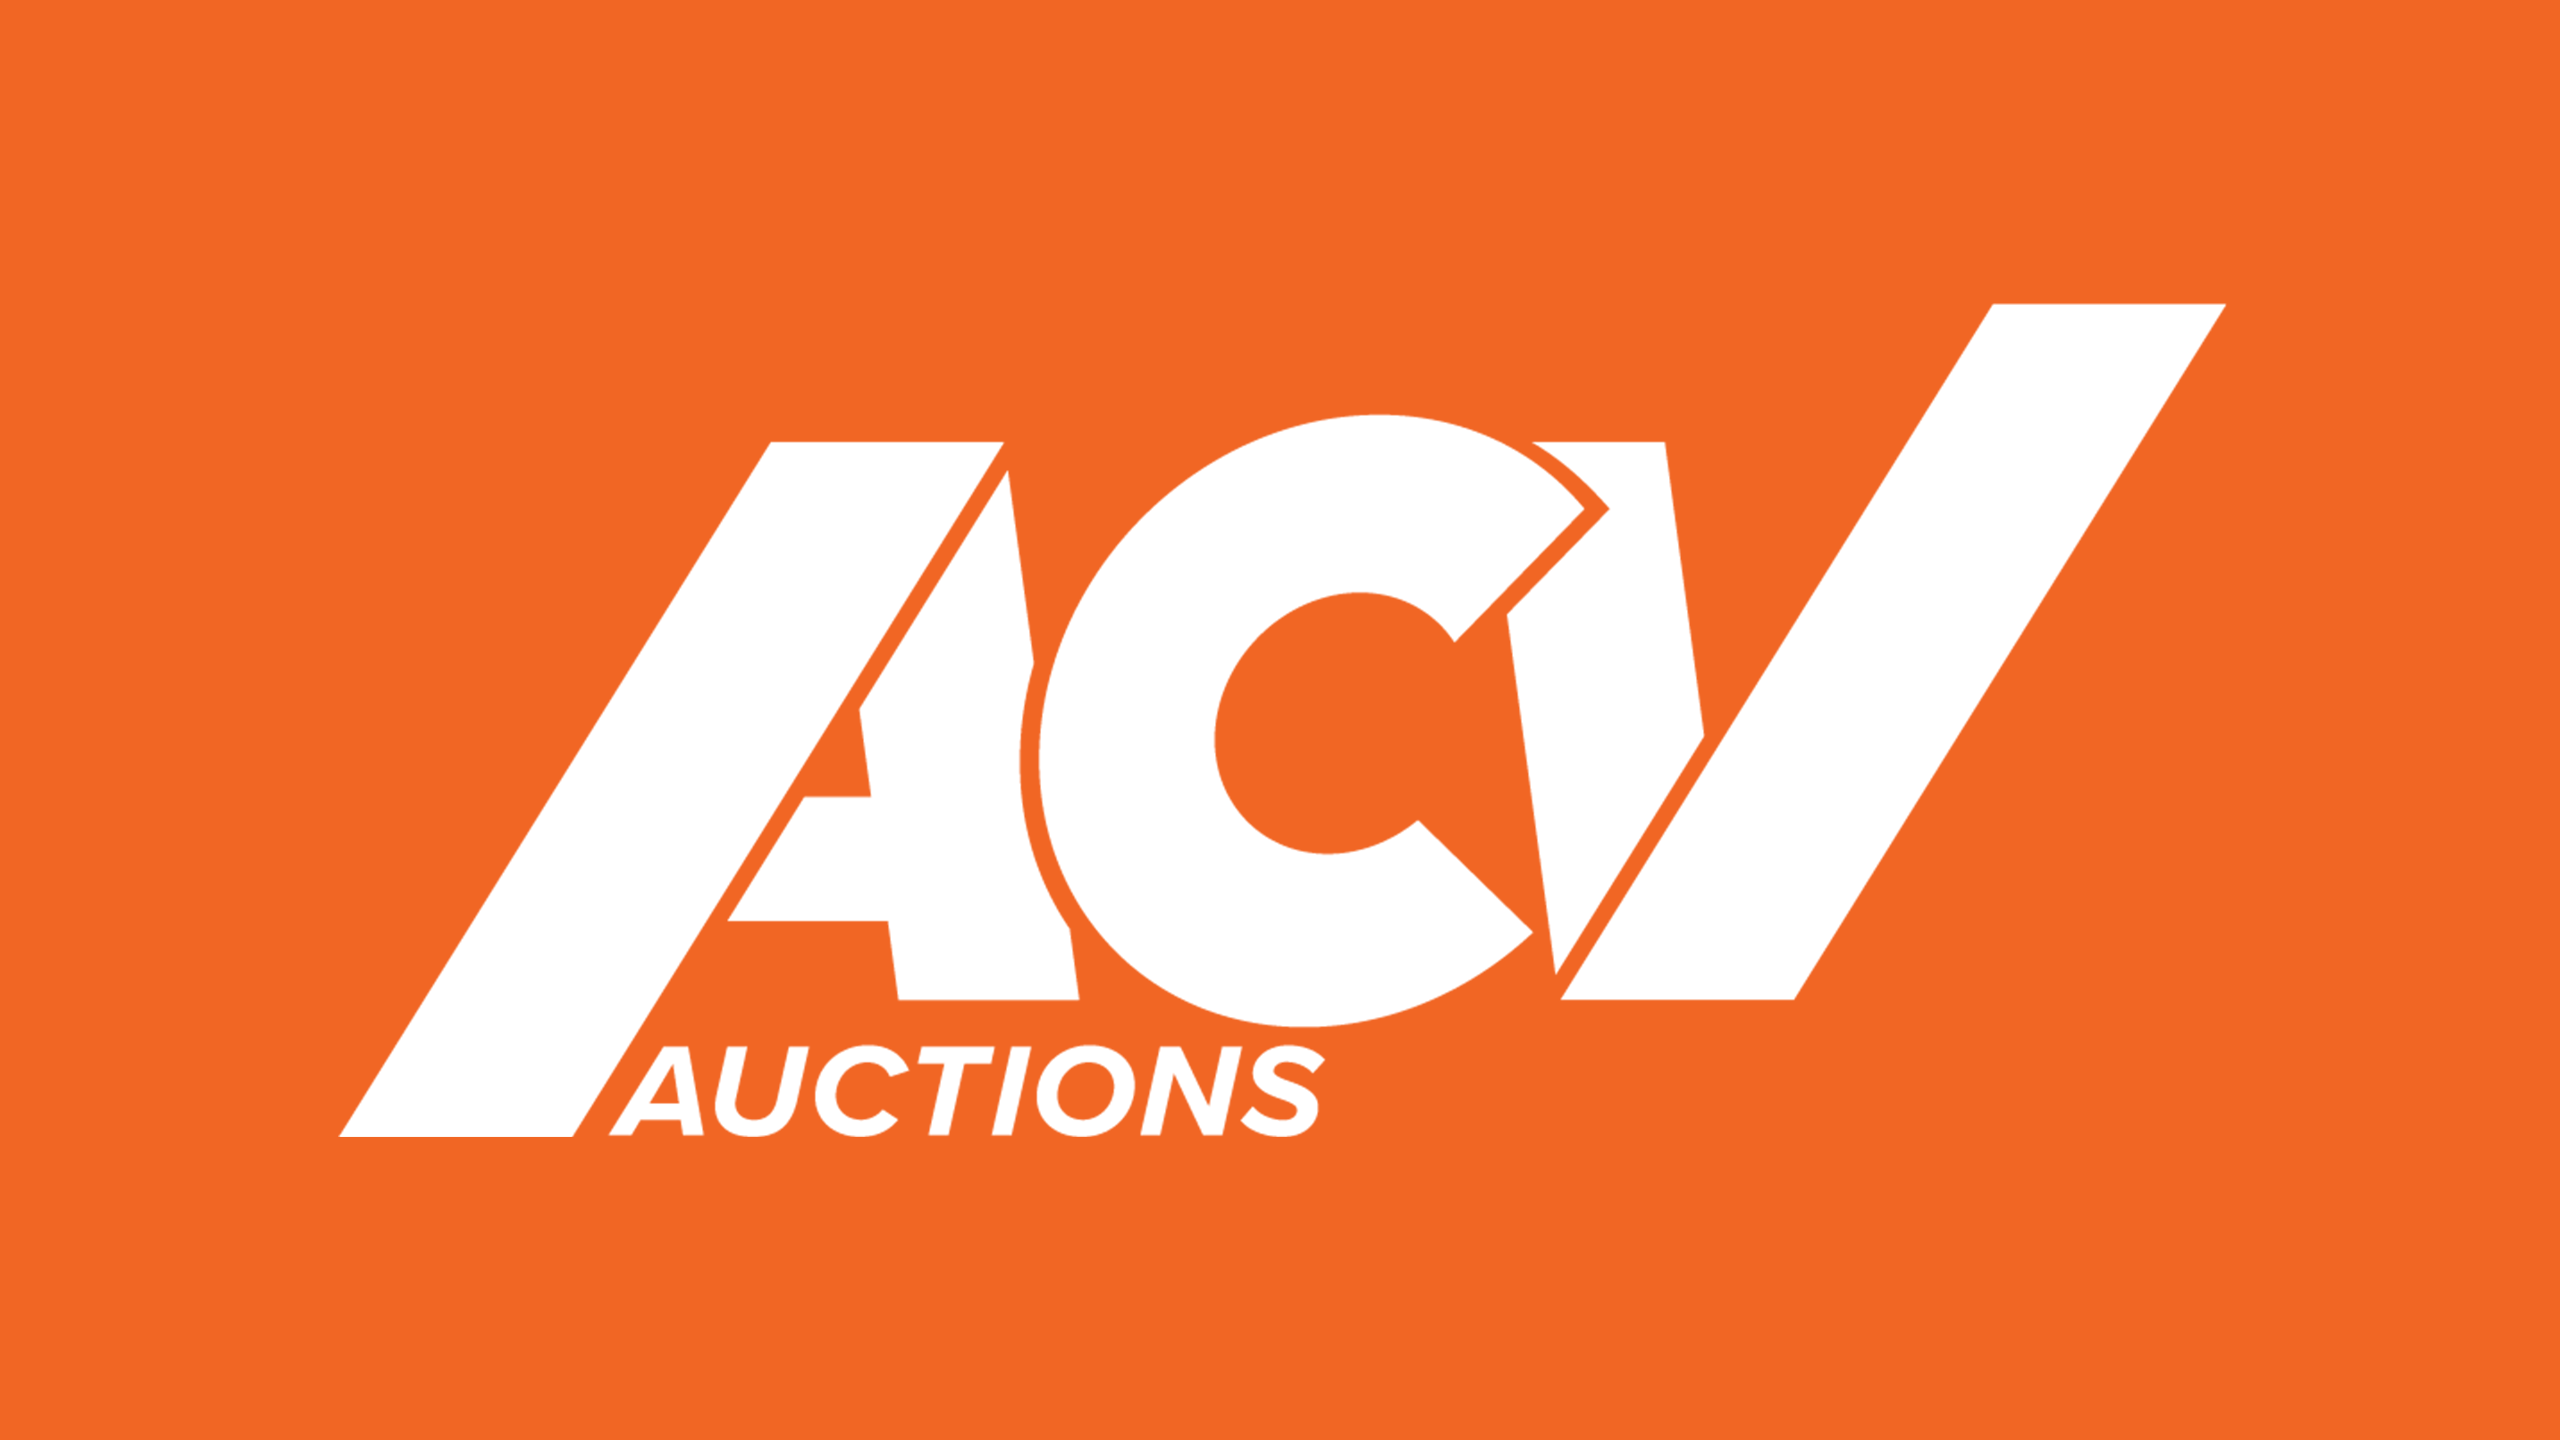 ACV Auctions Executive Sells $138,750 in Stock